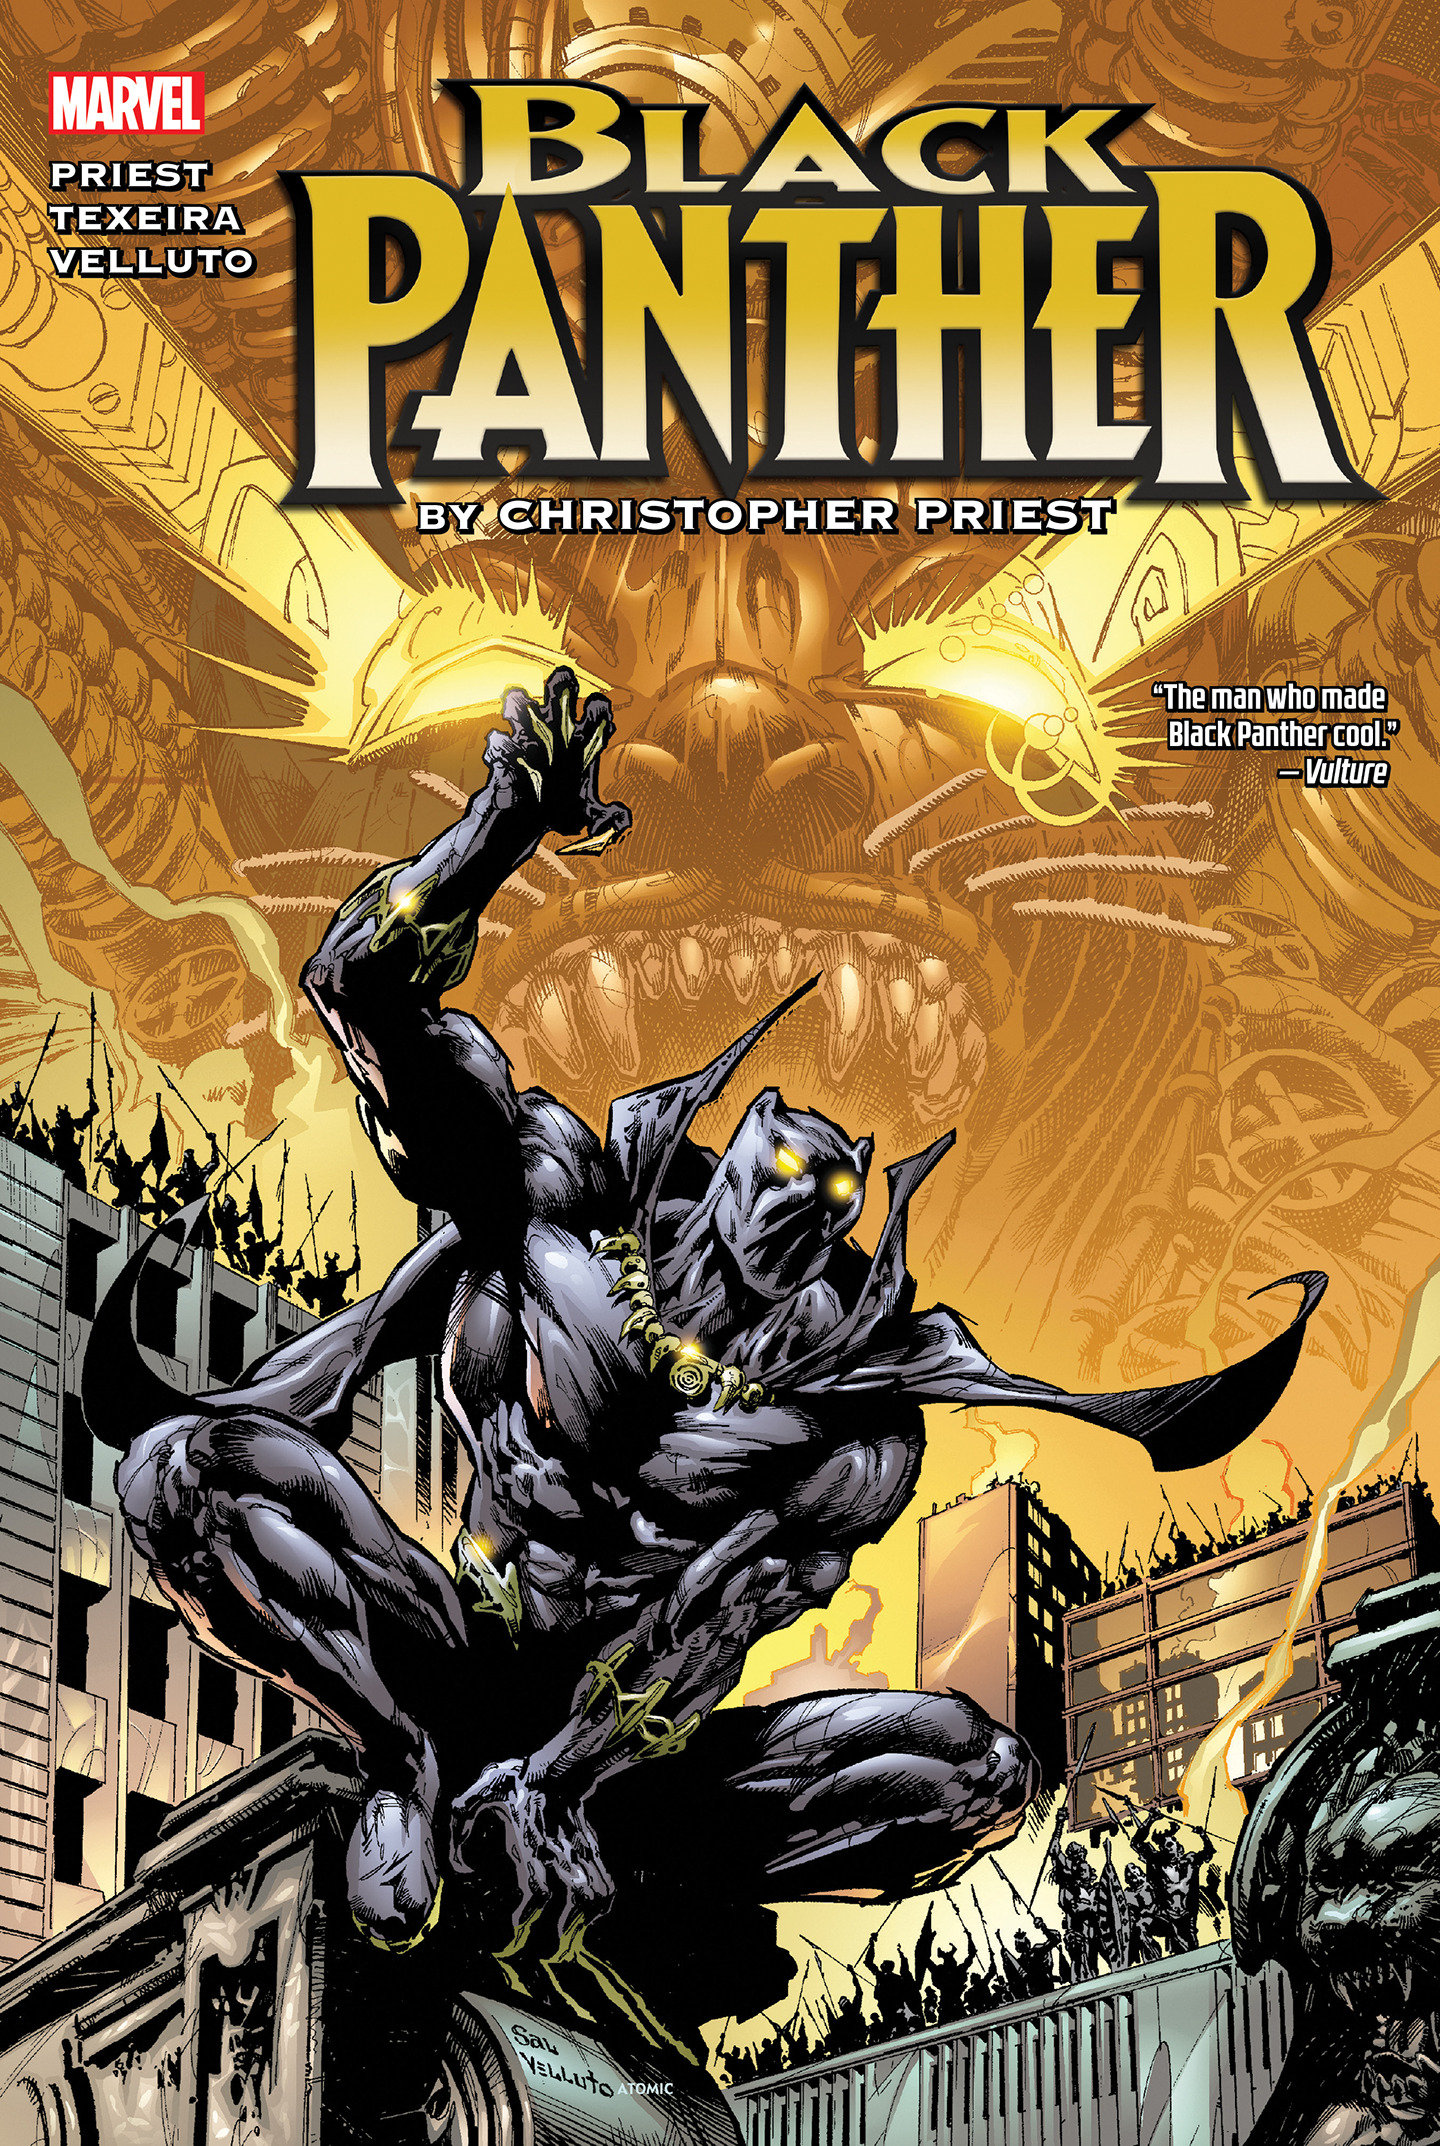 Black Panther by Priest Omnibus Hardcover Volume 1 Velluto Direct Market Variant